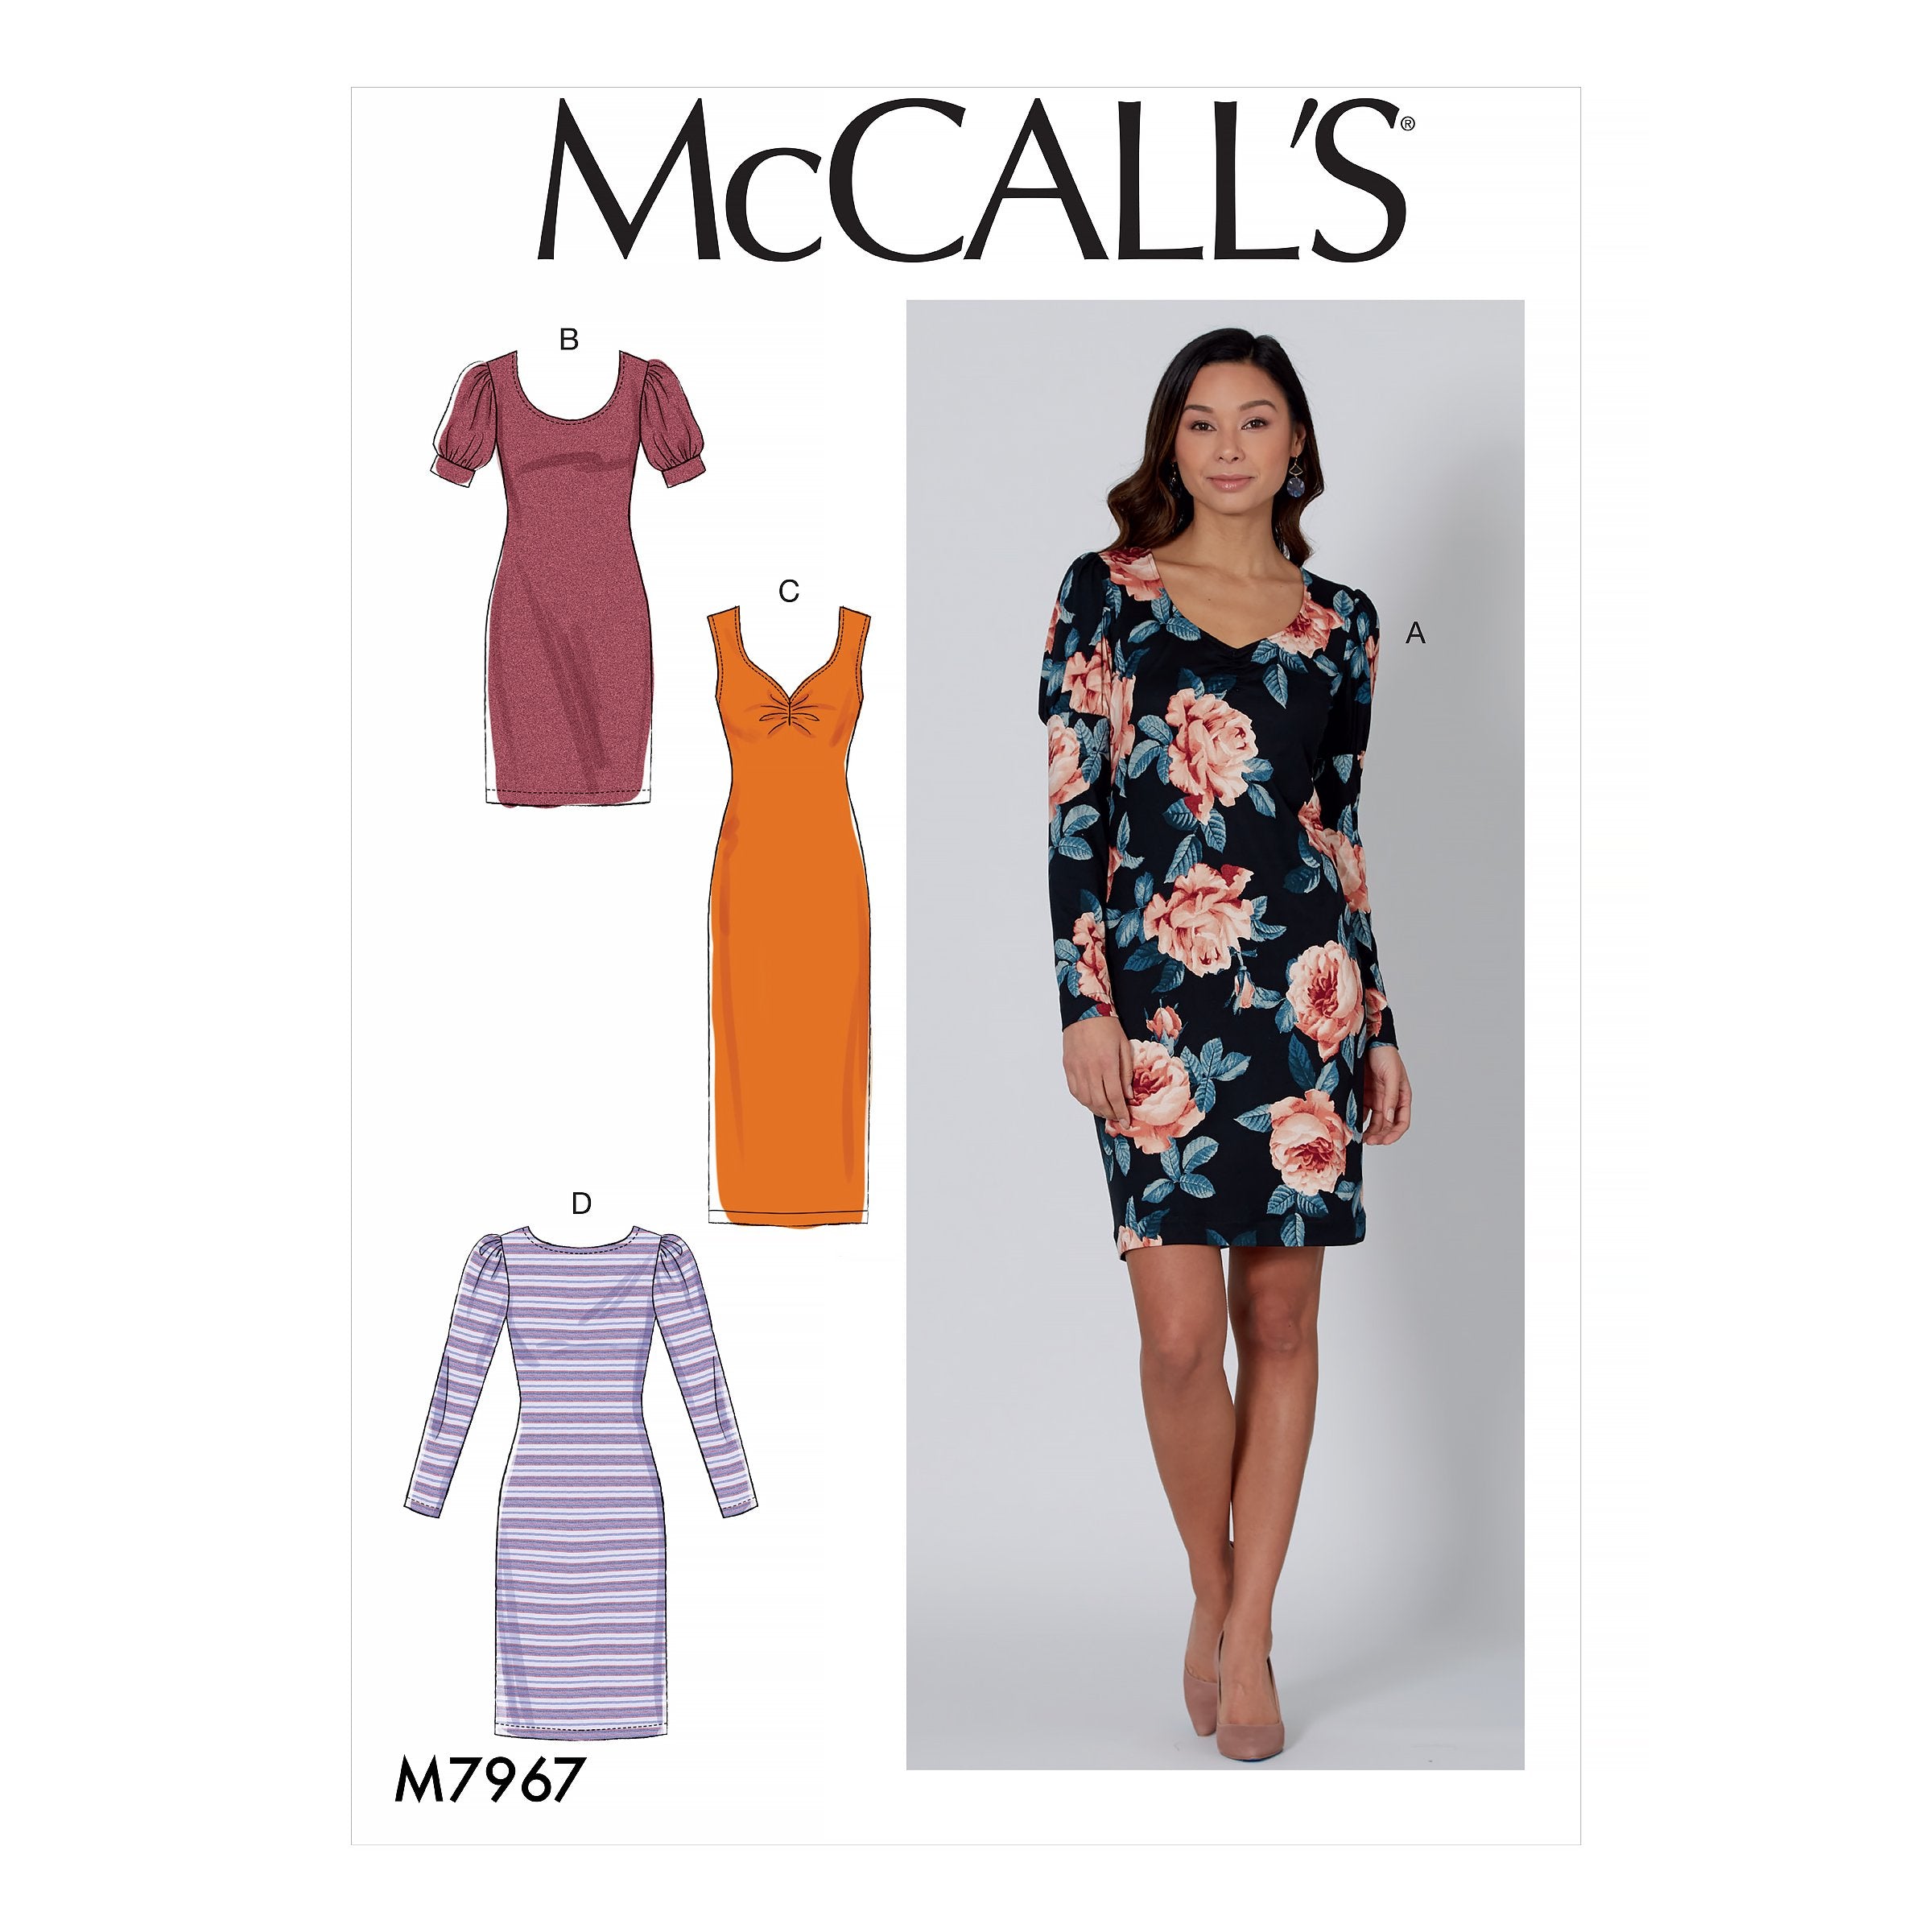 McCalls 7967 Dresses sewing pattern from Jaycotts Sewing Supplies